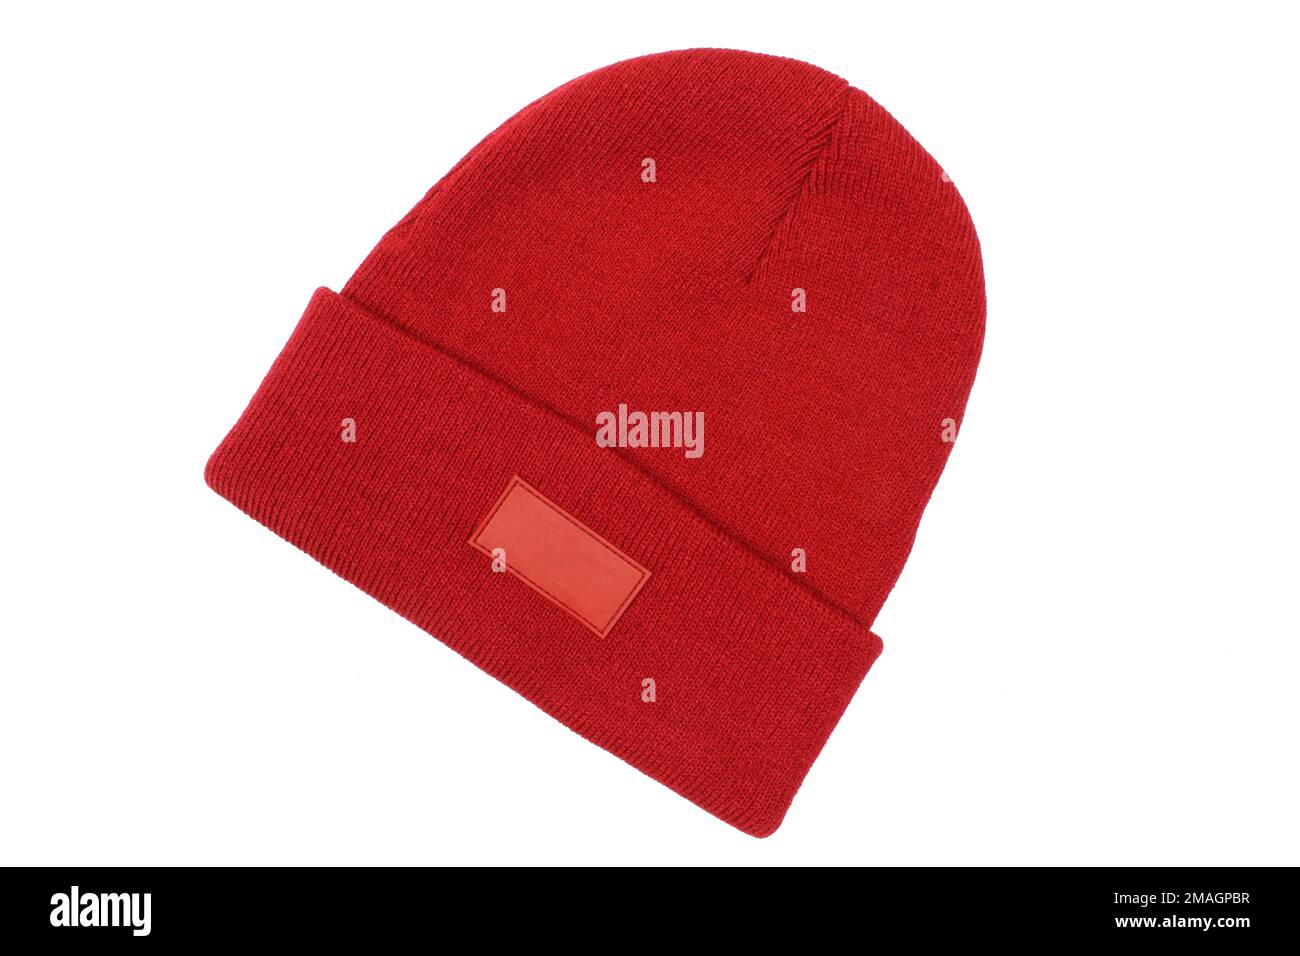 stock and - outdoors hi-res Alamy Beanie cold images photography hat